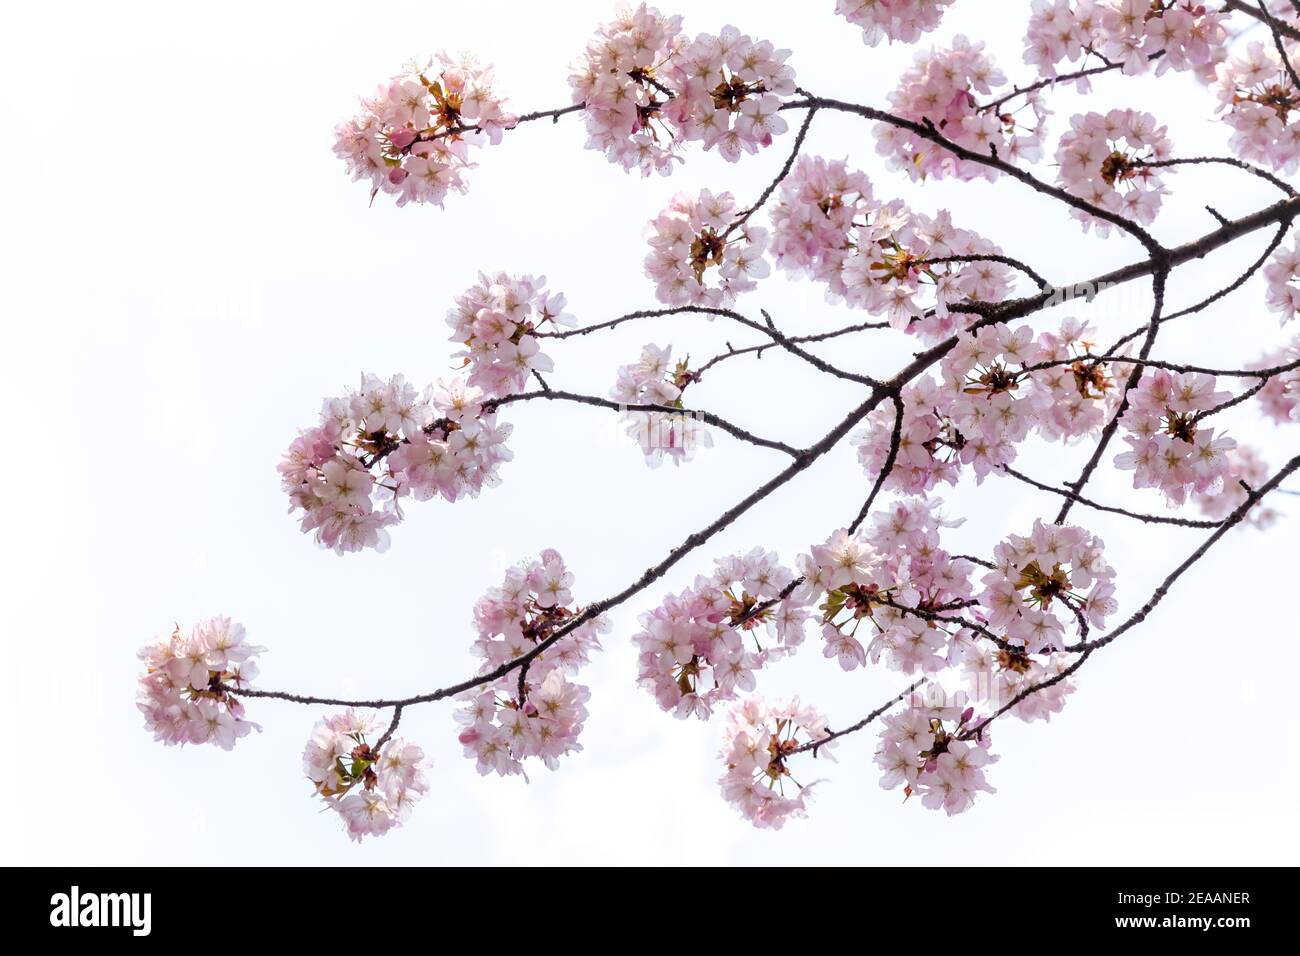 A branch with Sukura Cherry blossoms in full bloom on a white background.. Stock Photo